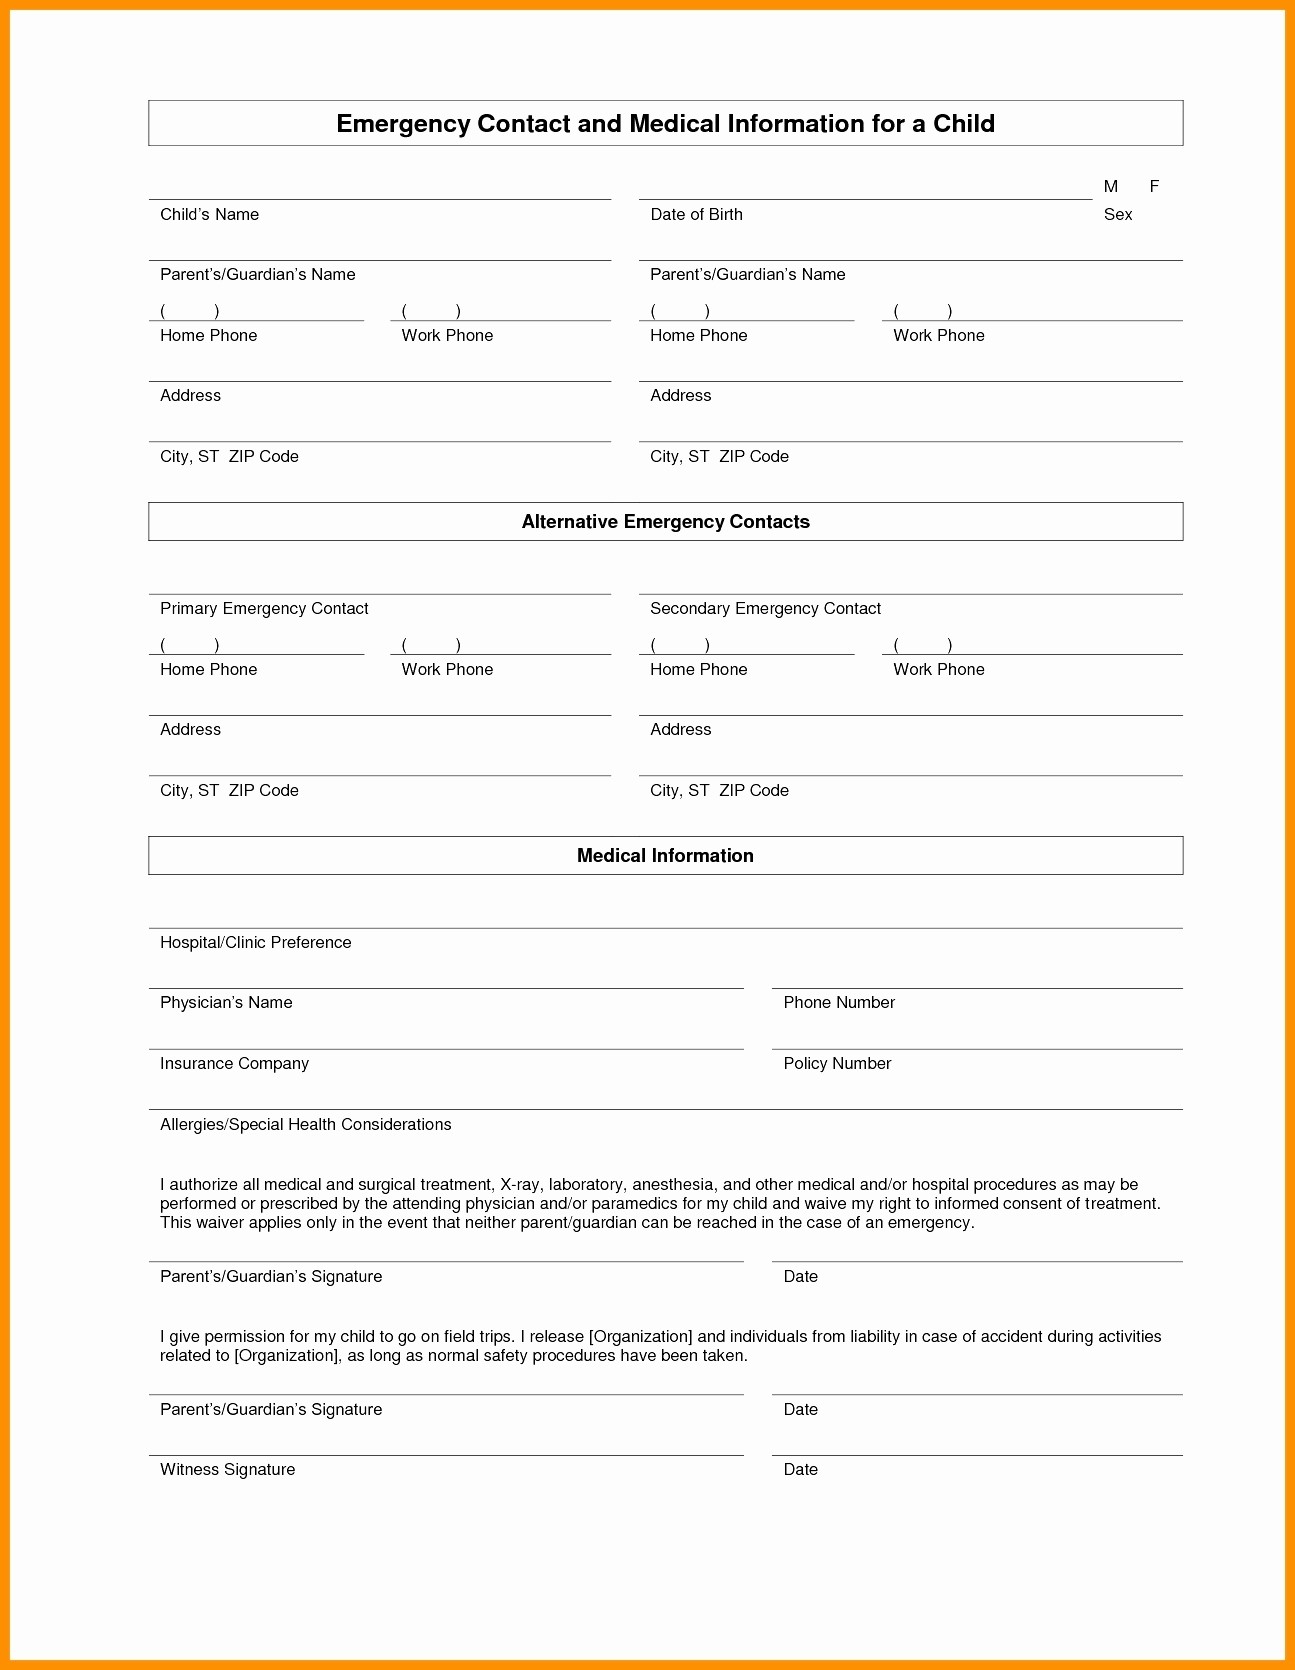 Fmla Intermittent Leave Tracking Form Best Of Document